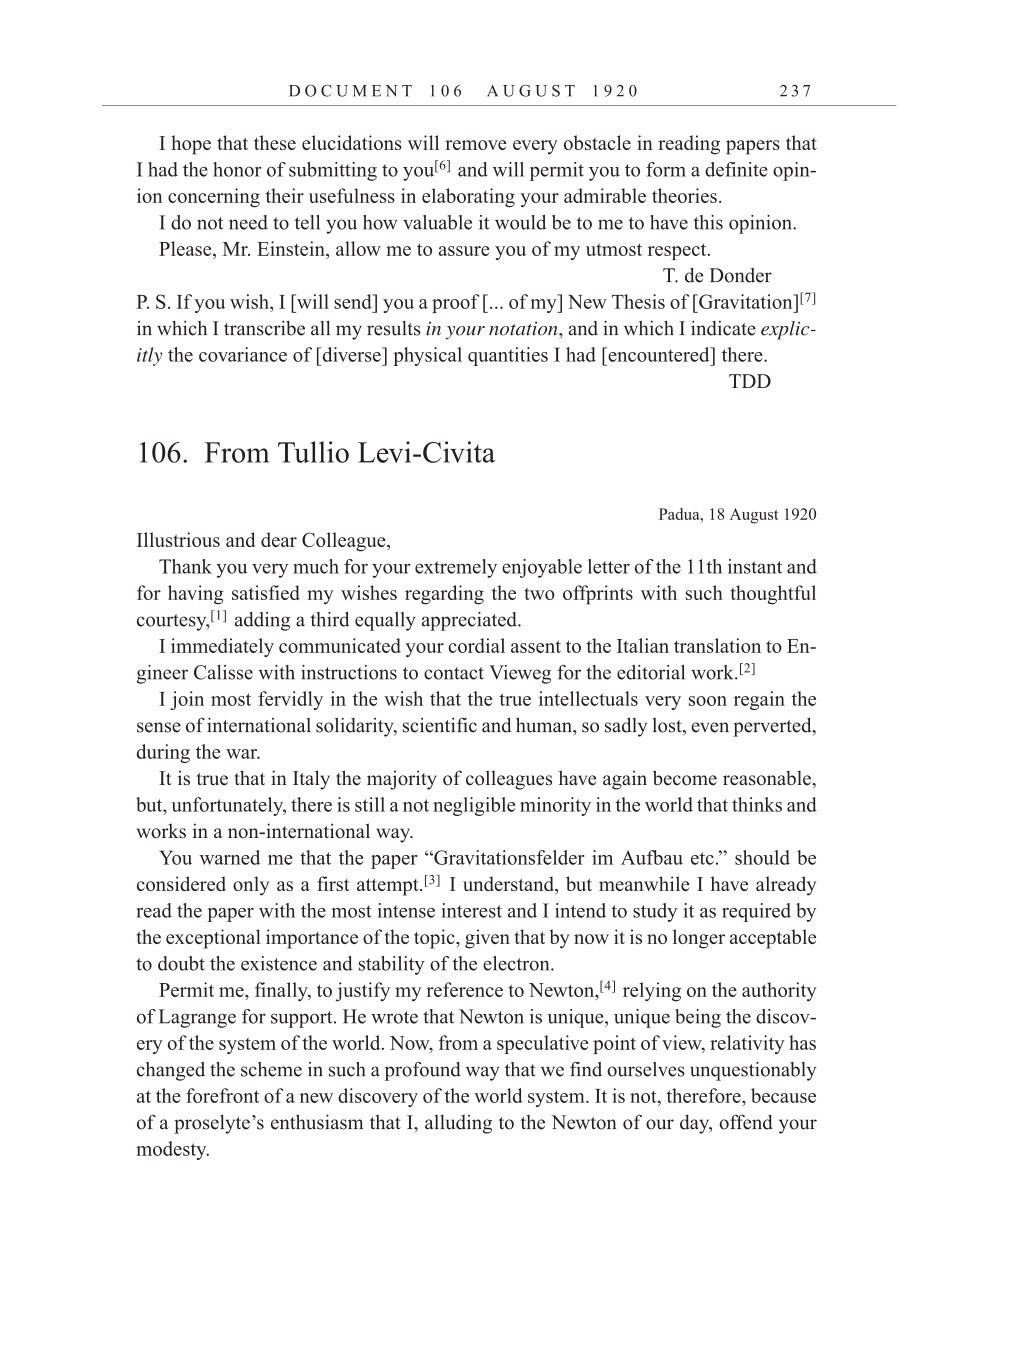 Volume 10: The Berlin Years: Correspondence, May-December 1920, and Supplementary Correspondence, 1909-1920 (English translation supplement) page 237